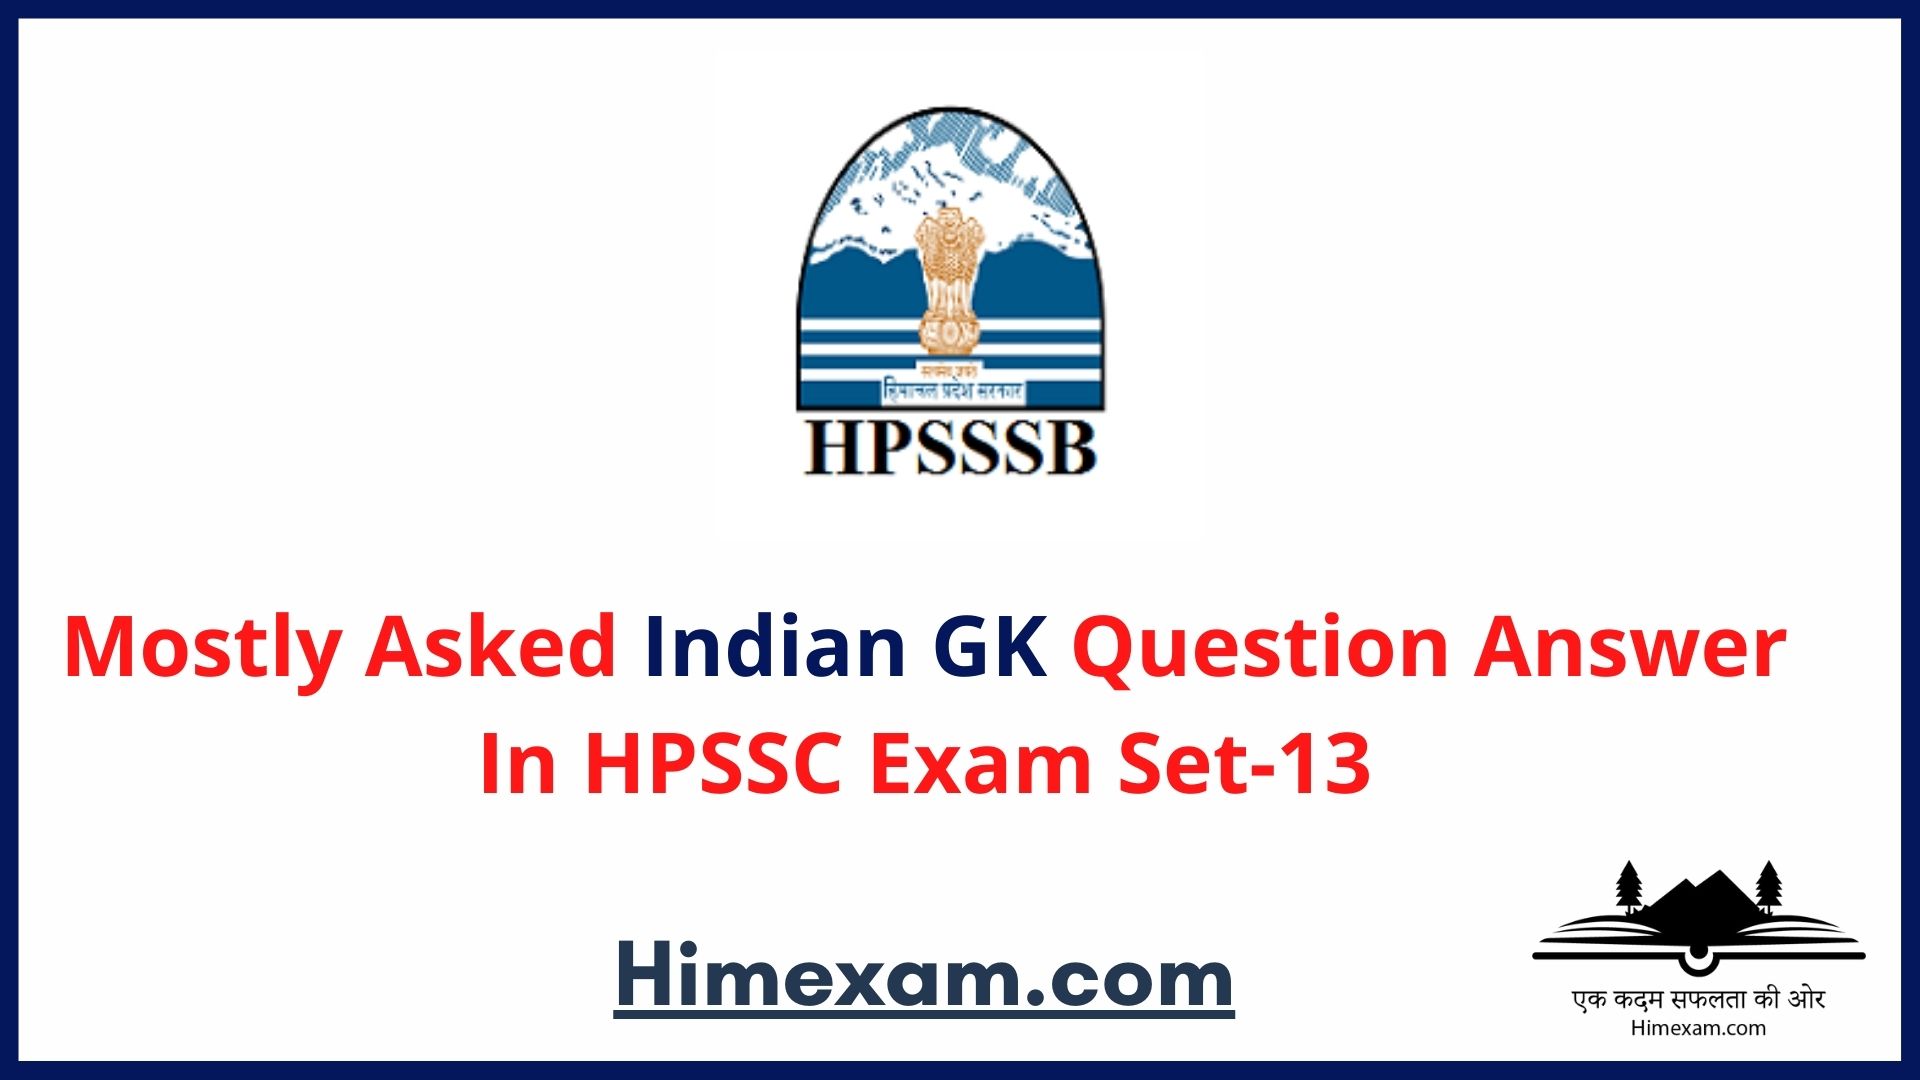 Mostly Asked Indian GK Question Answer In HPSSC Exam Set-13